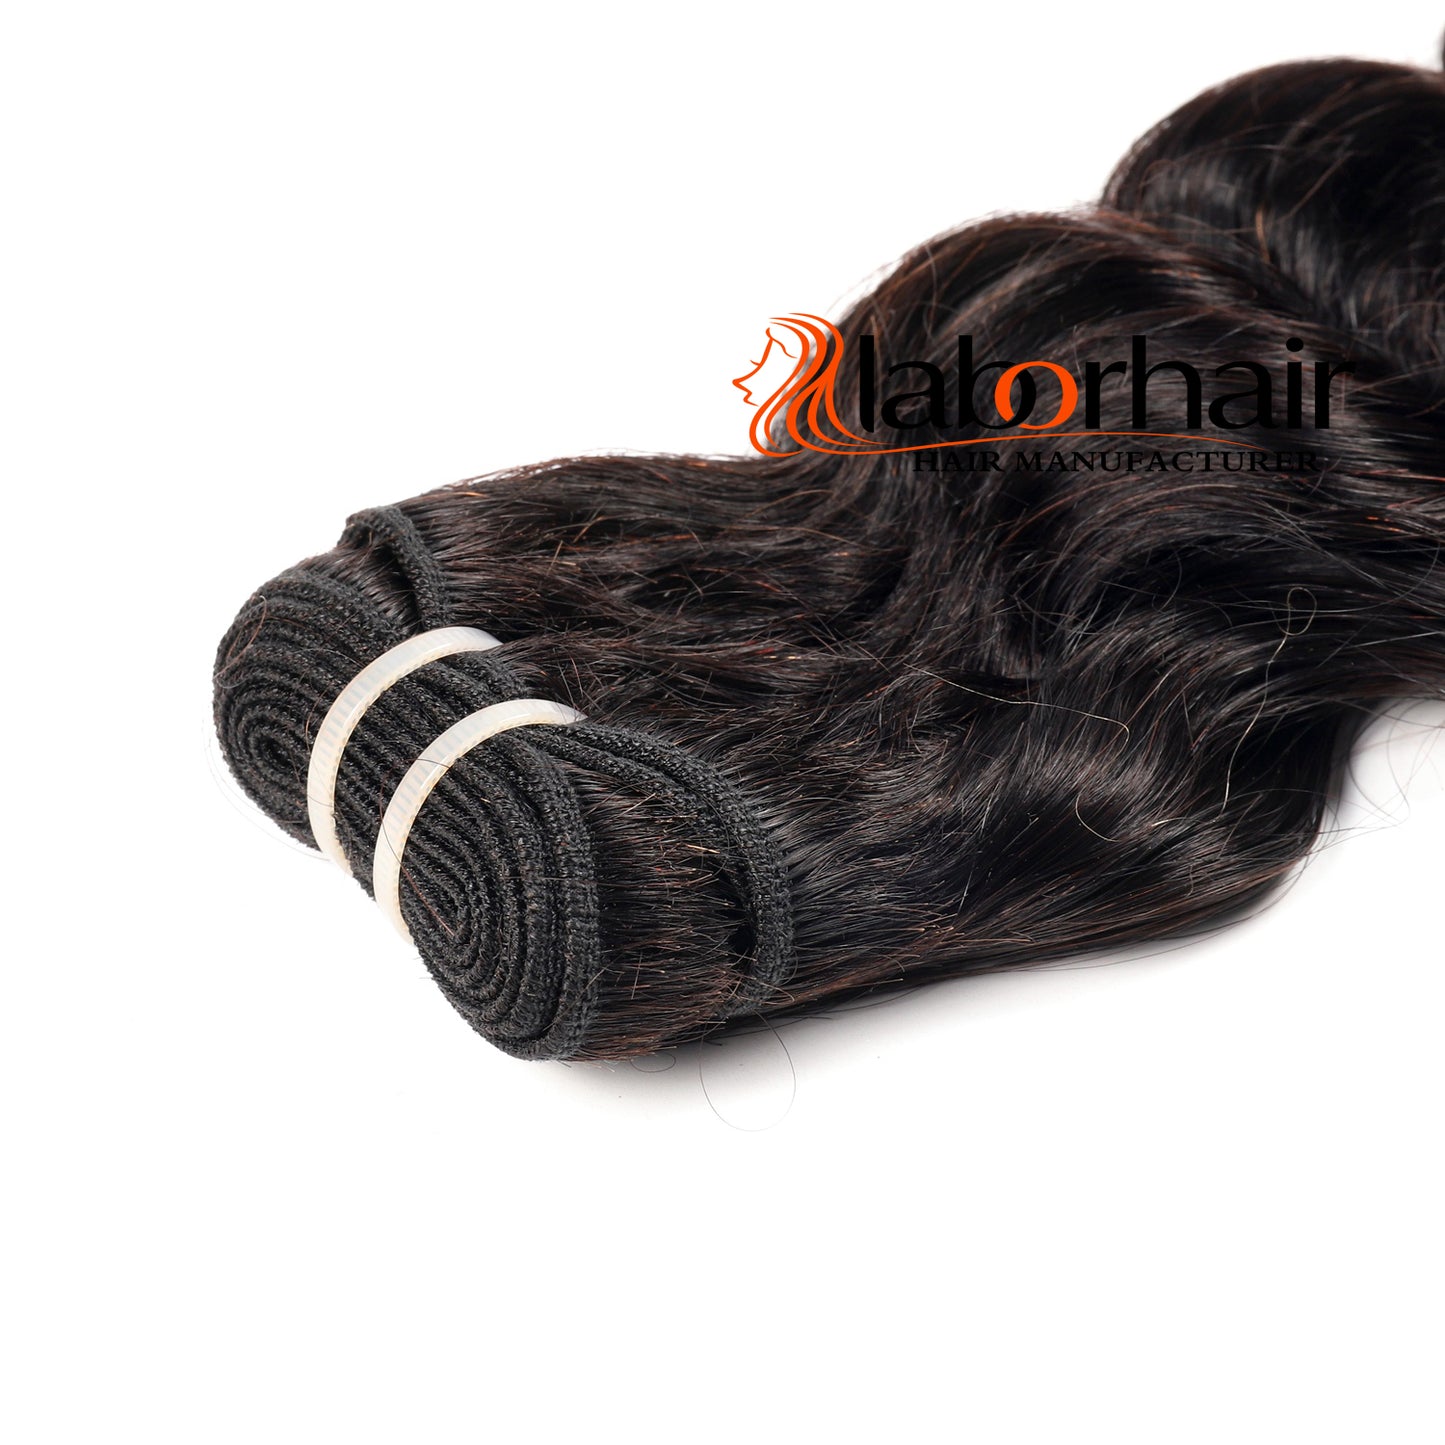 Deep Wave Virgin Human Hair Extensions with 3 Years Life Time